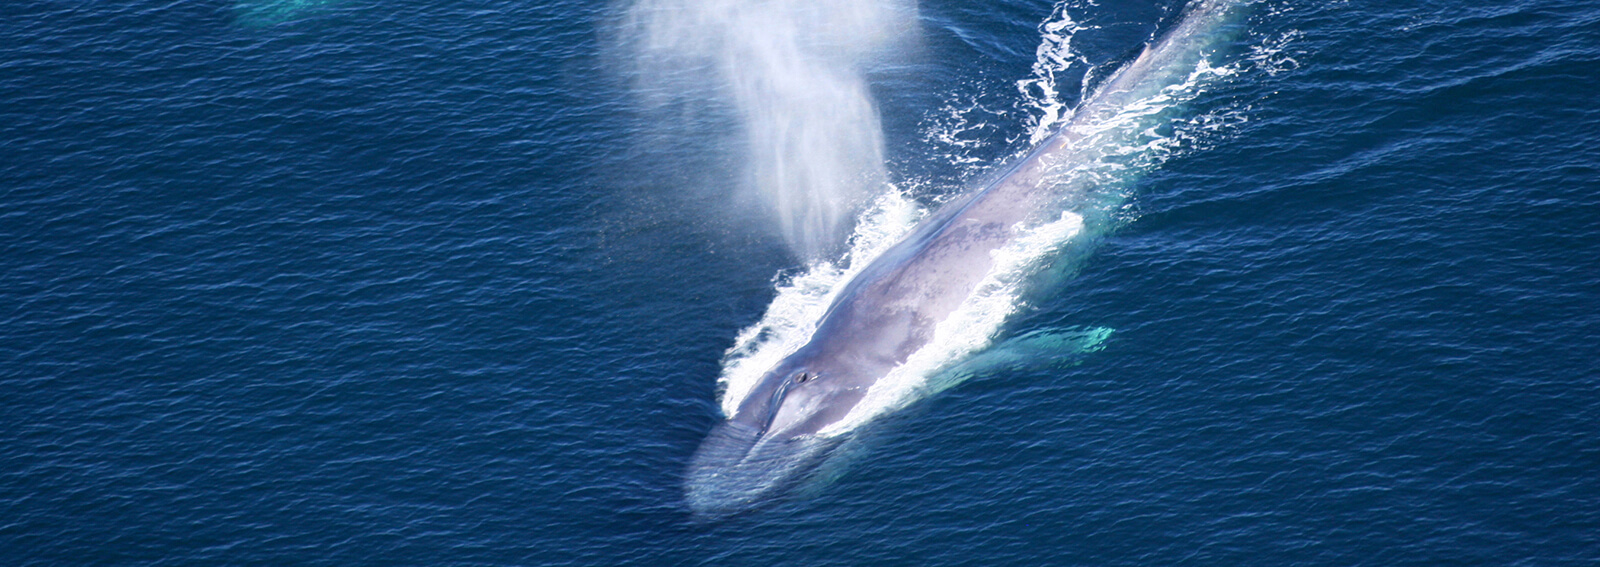 A blue whale seen from above